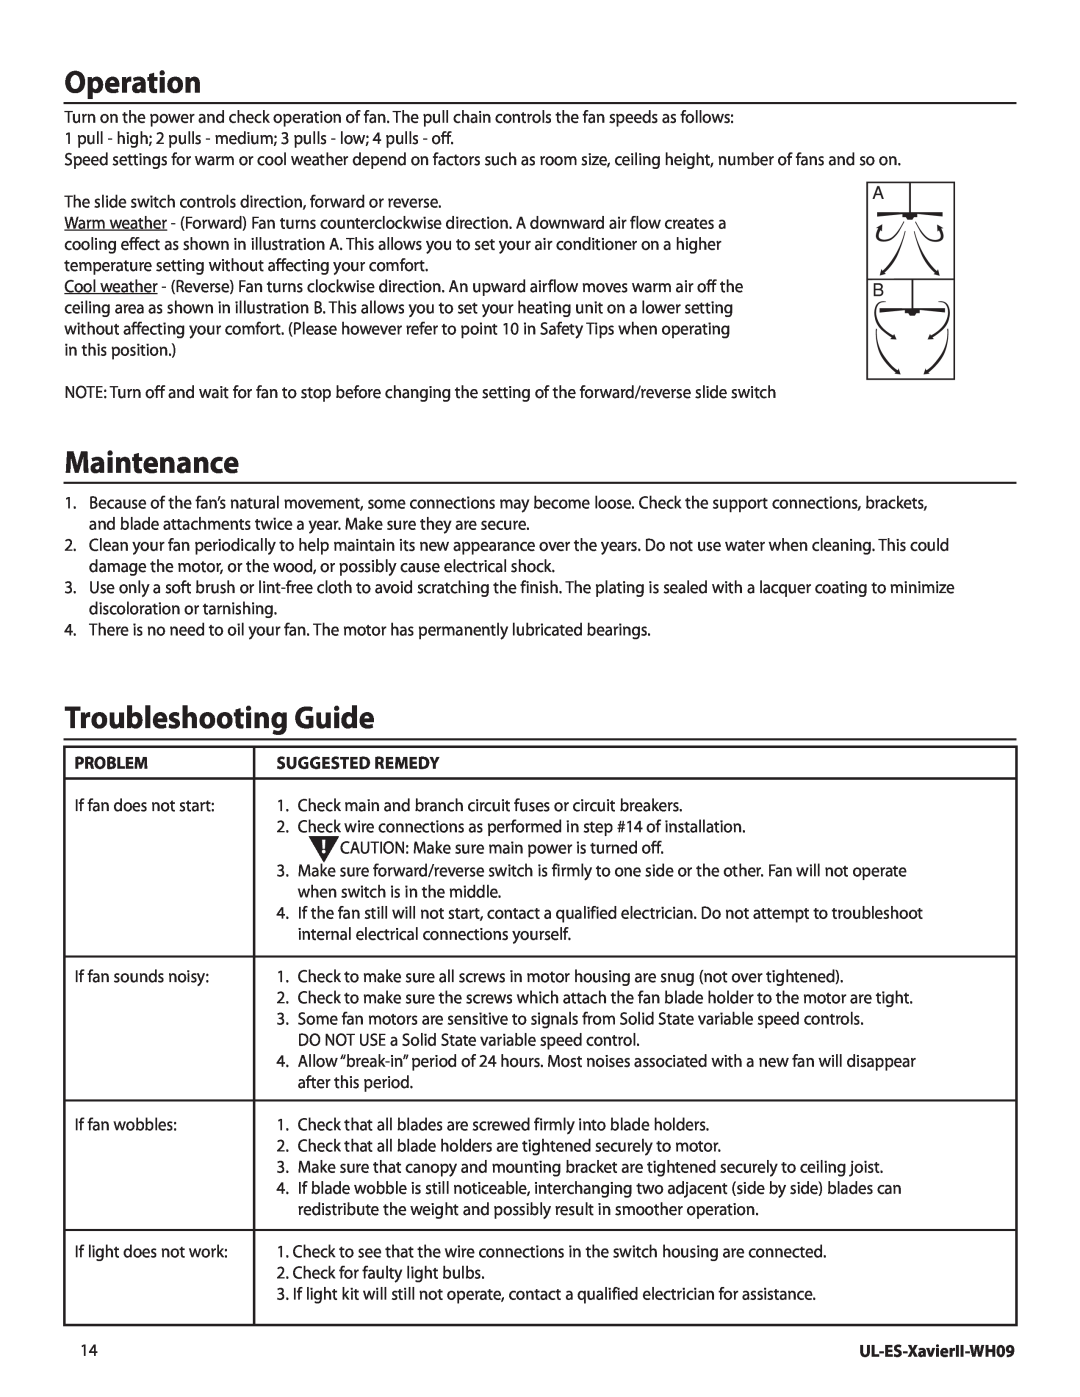 Westinghouse WH09 manual Operation, Maintenance, Troubleshooting Guide, Problem, Suggested Remedy 